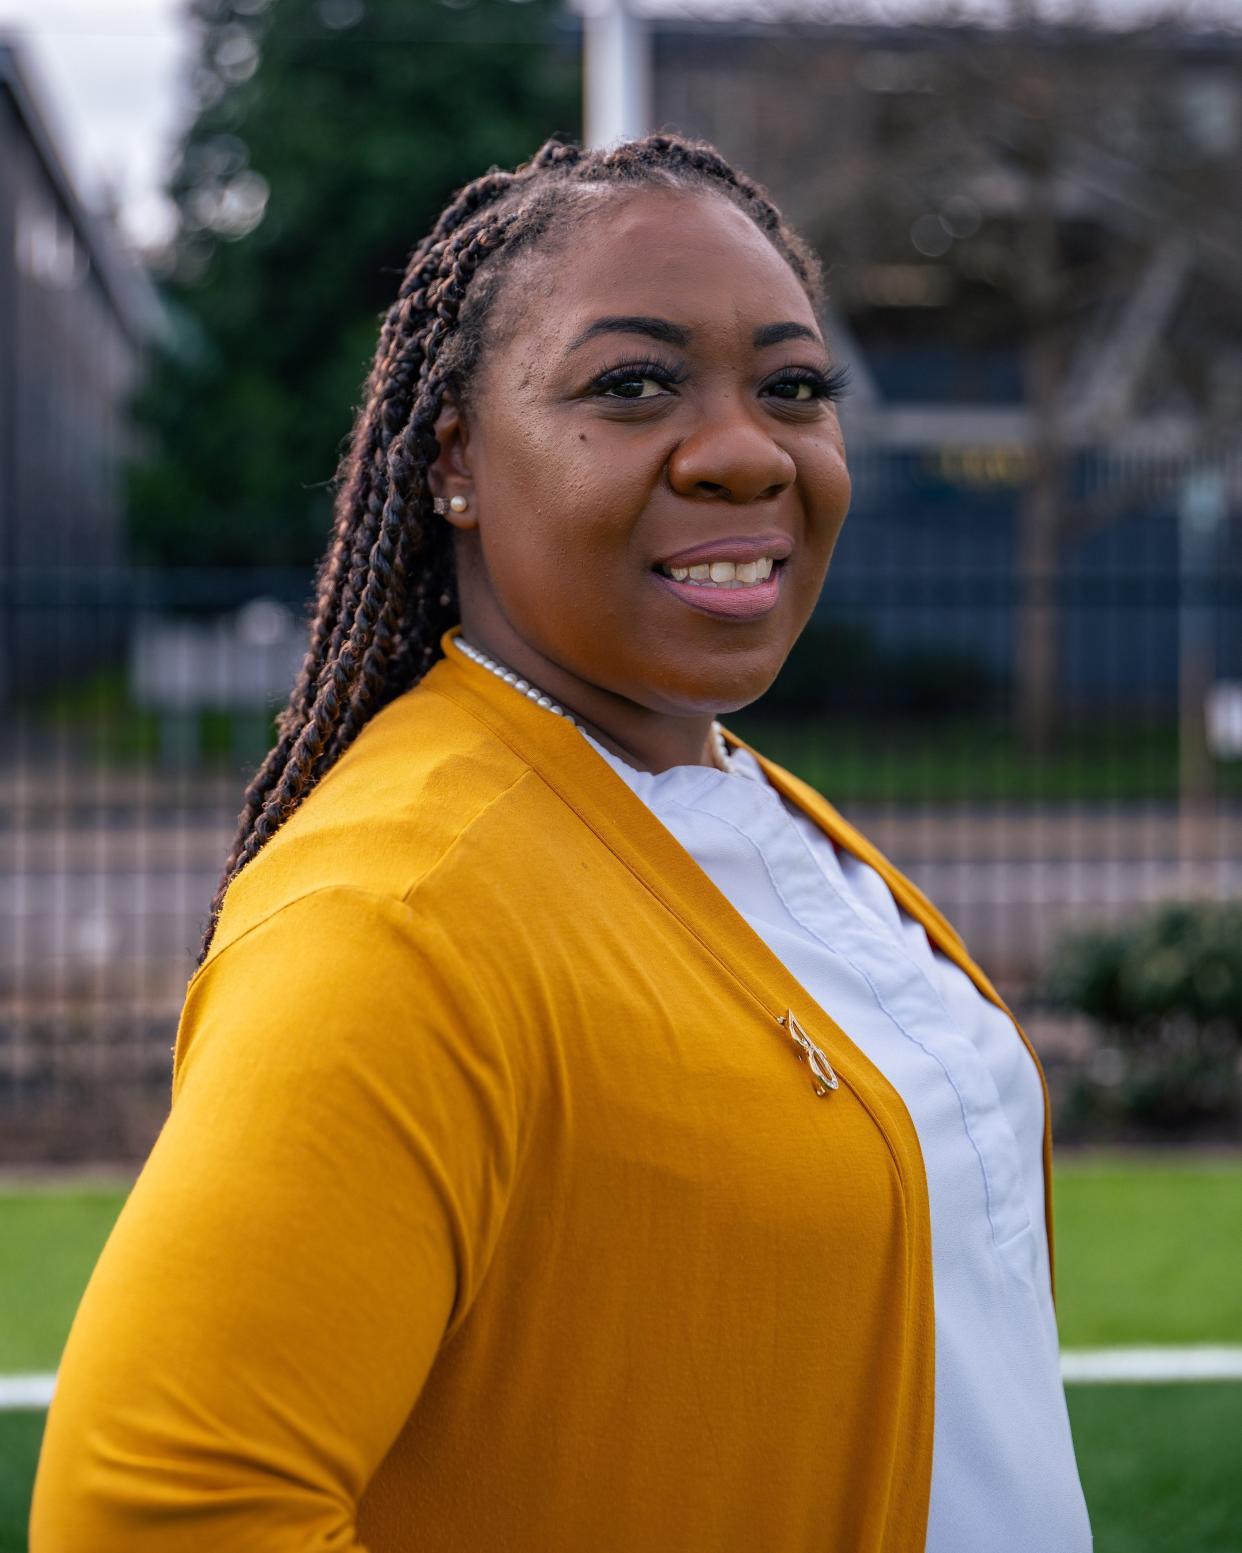 Shanaè Joyce-Stringer is running for Eugene Mayor in the May 21 election.